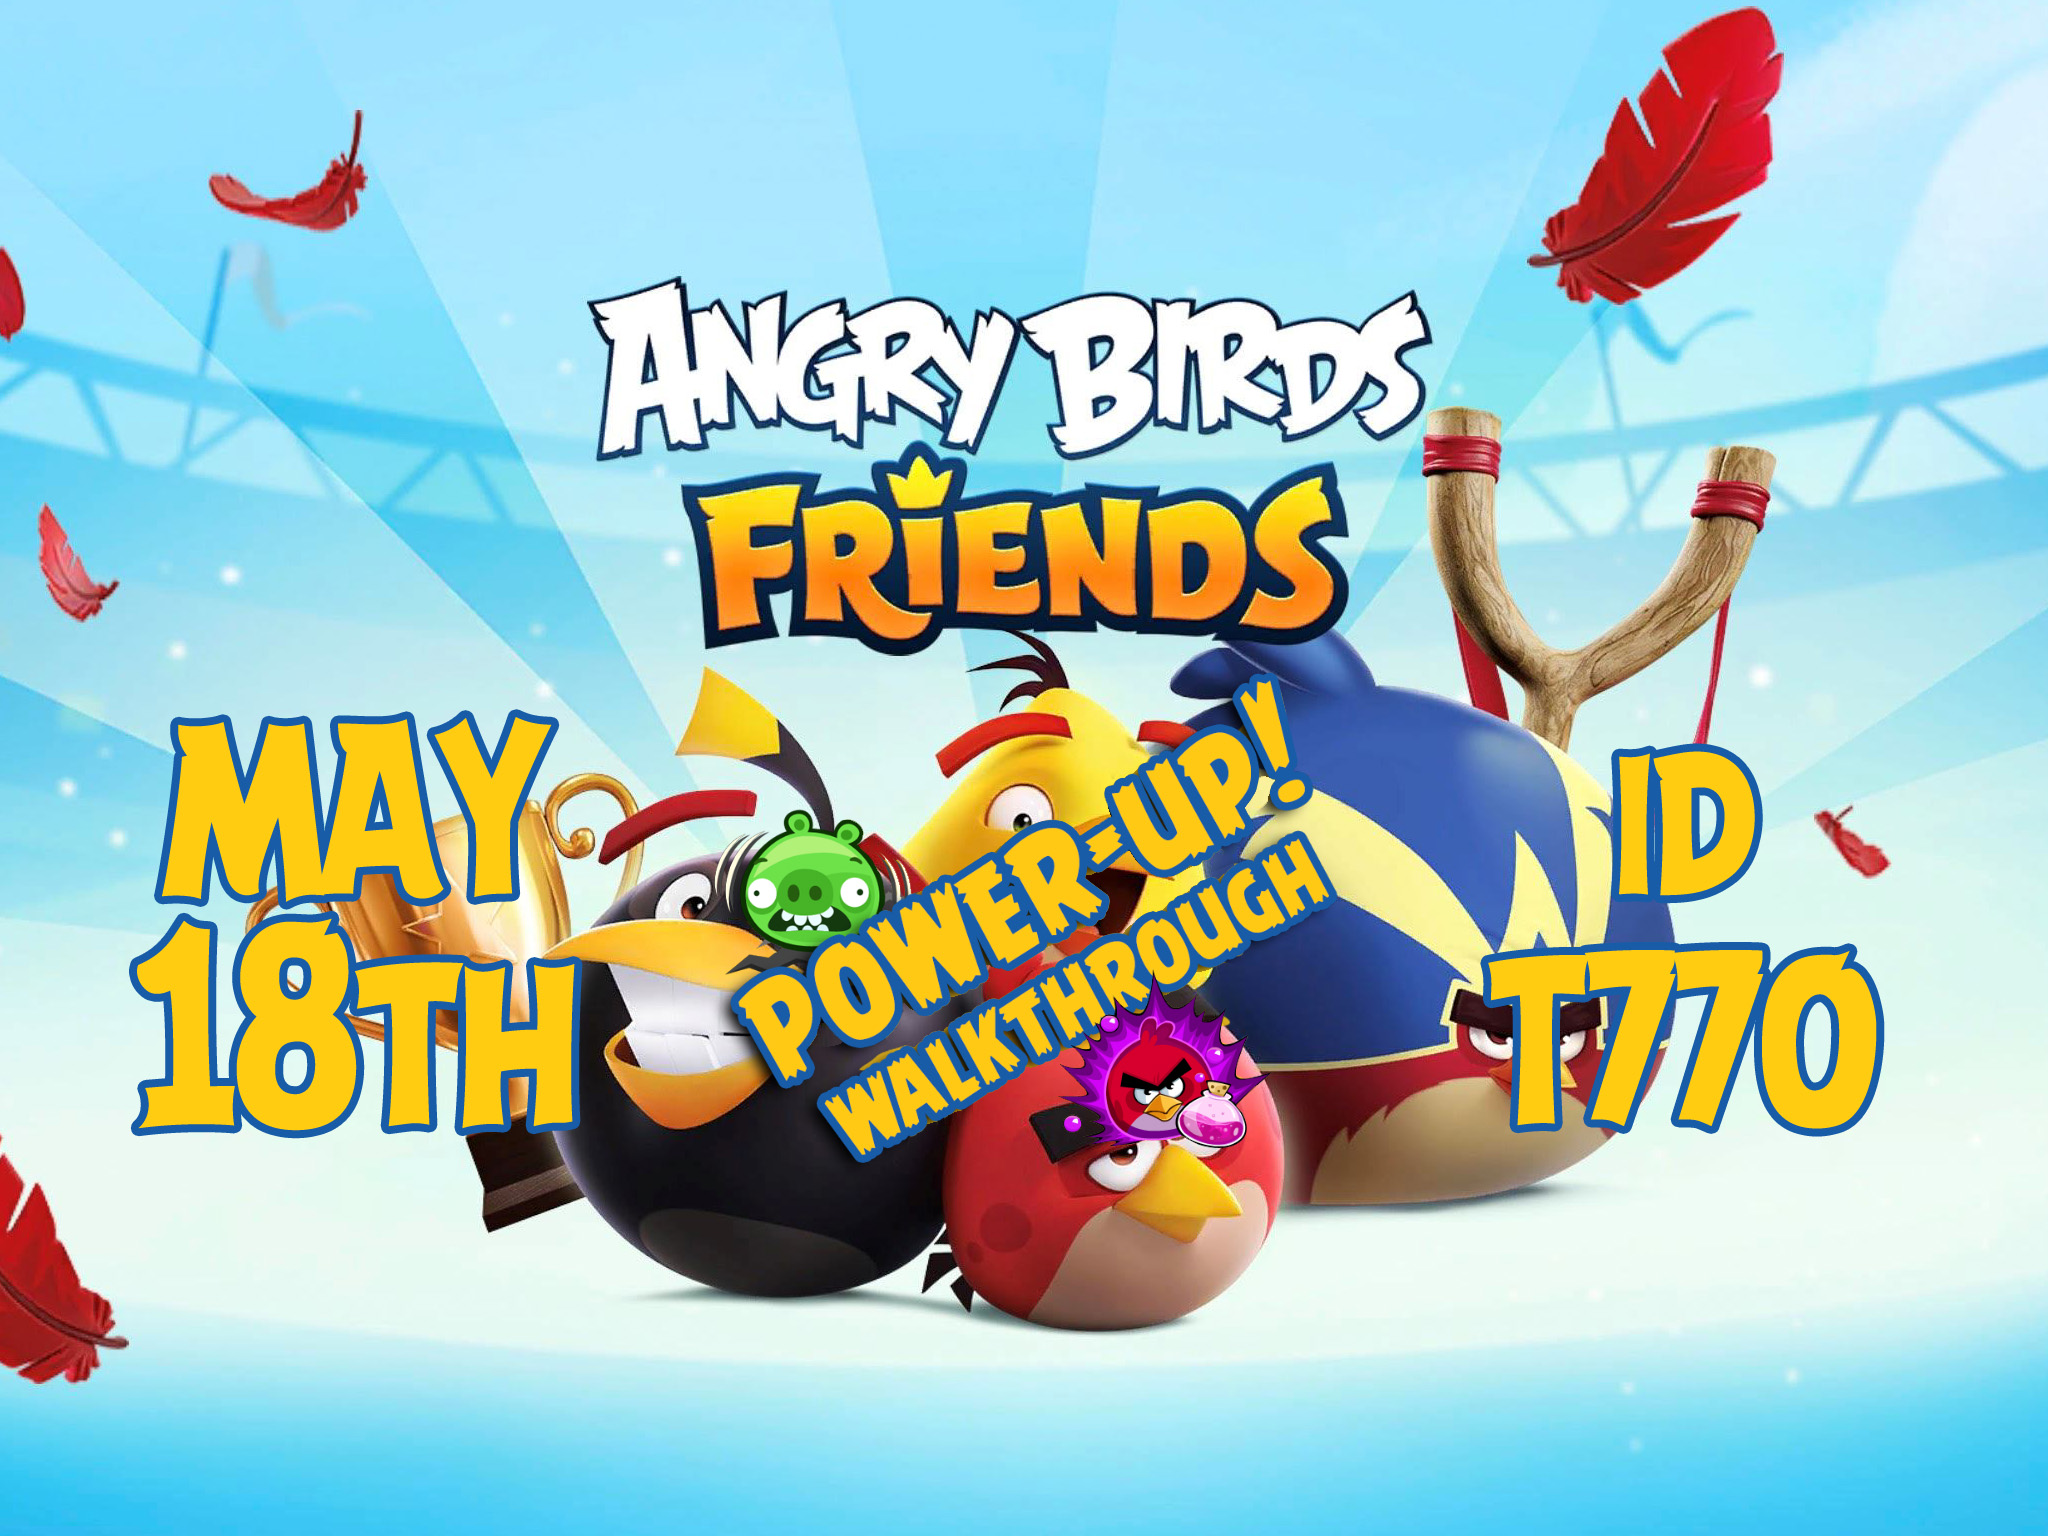 Angry-Birds-Friends-Tournament-T770-Feature-Image-PU